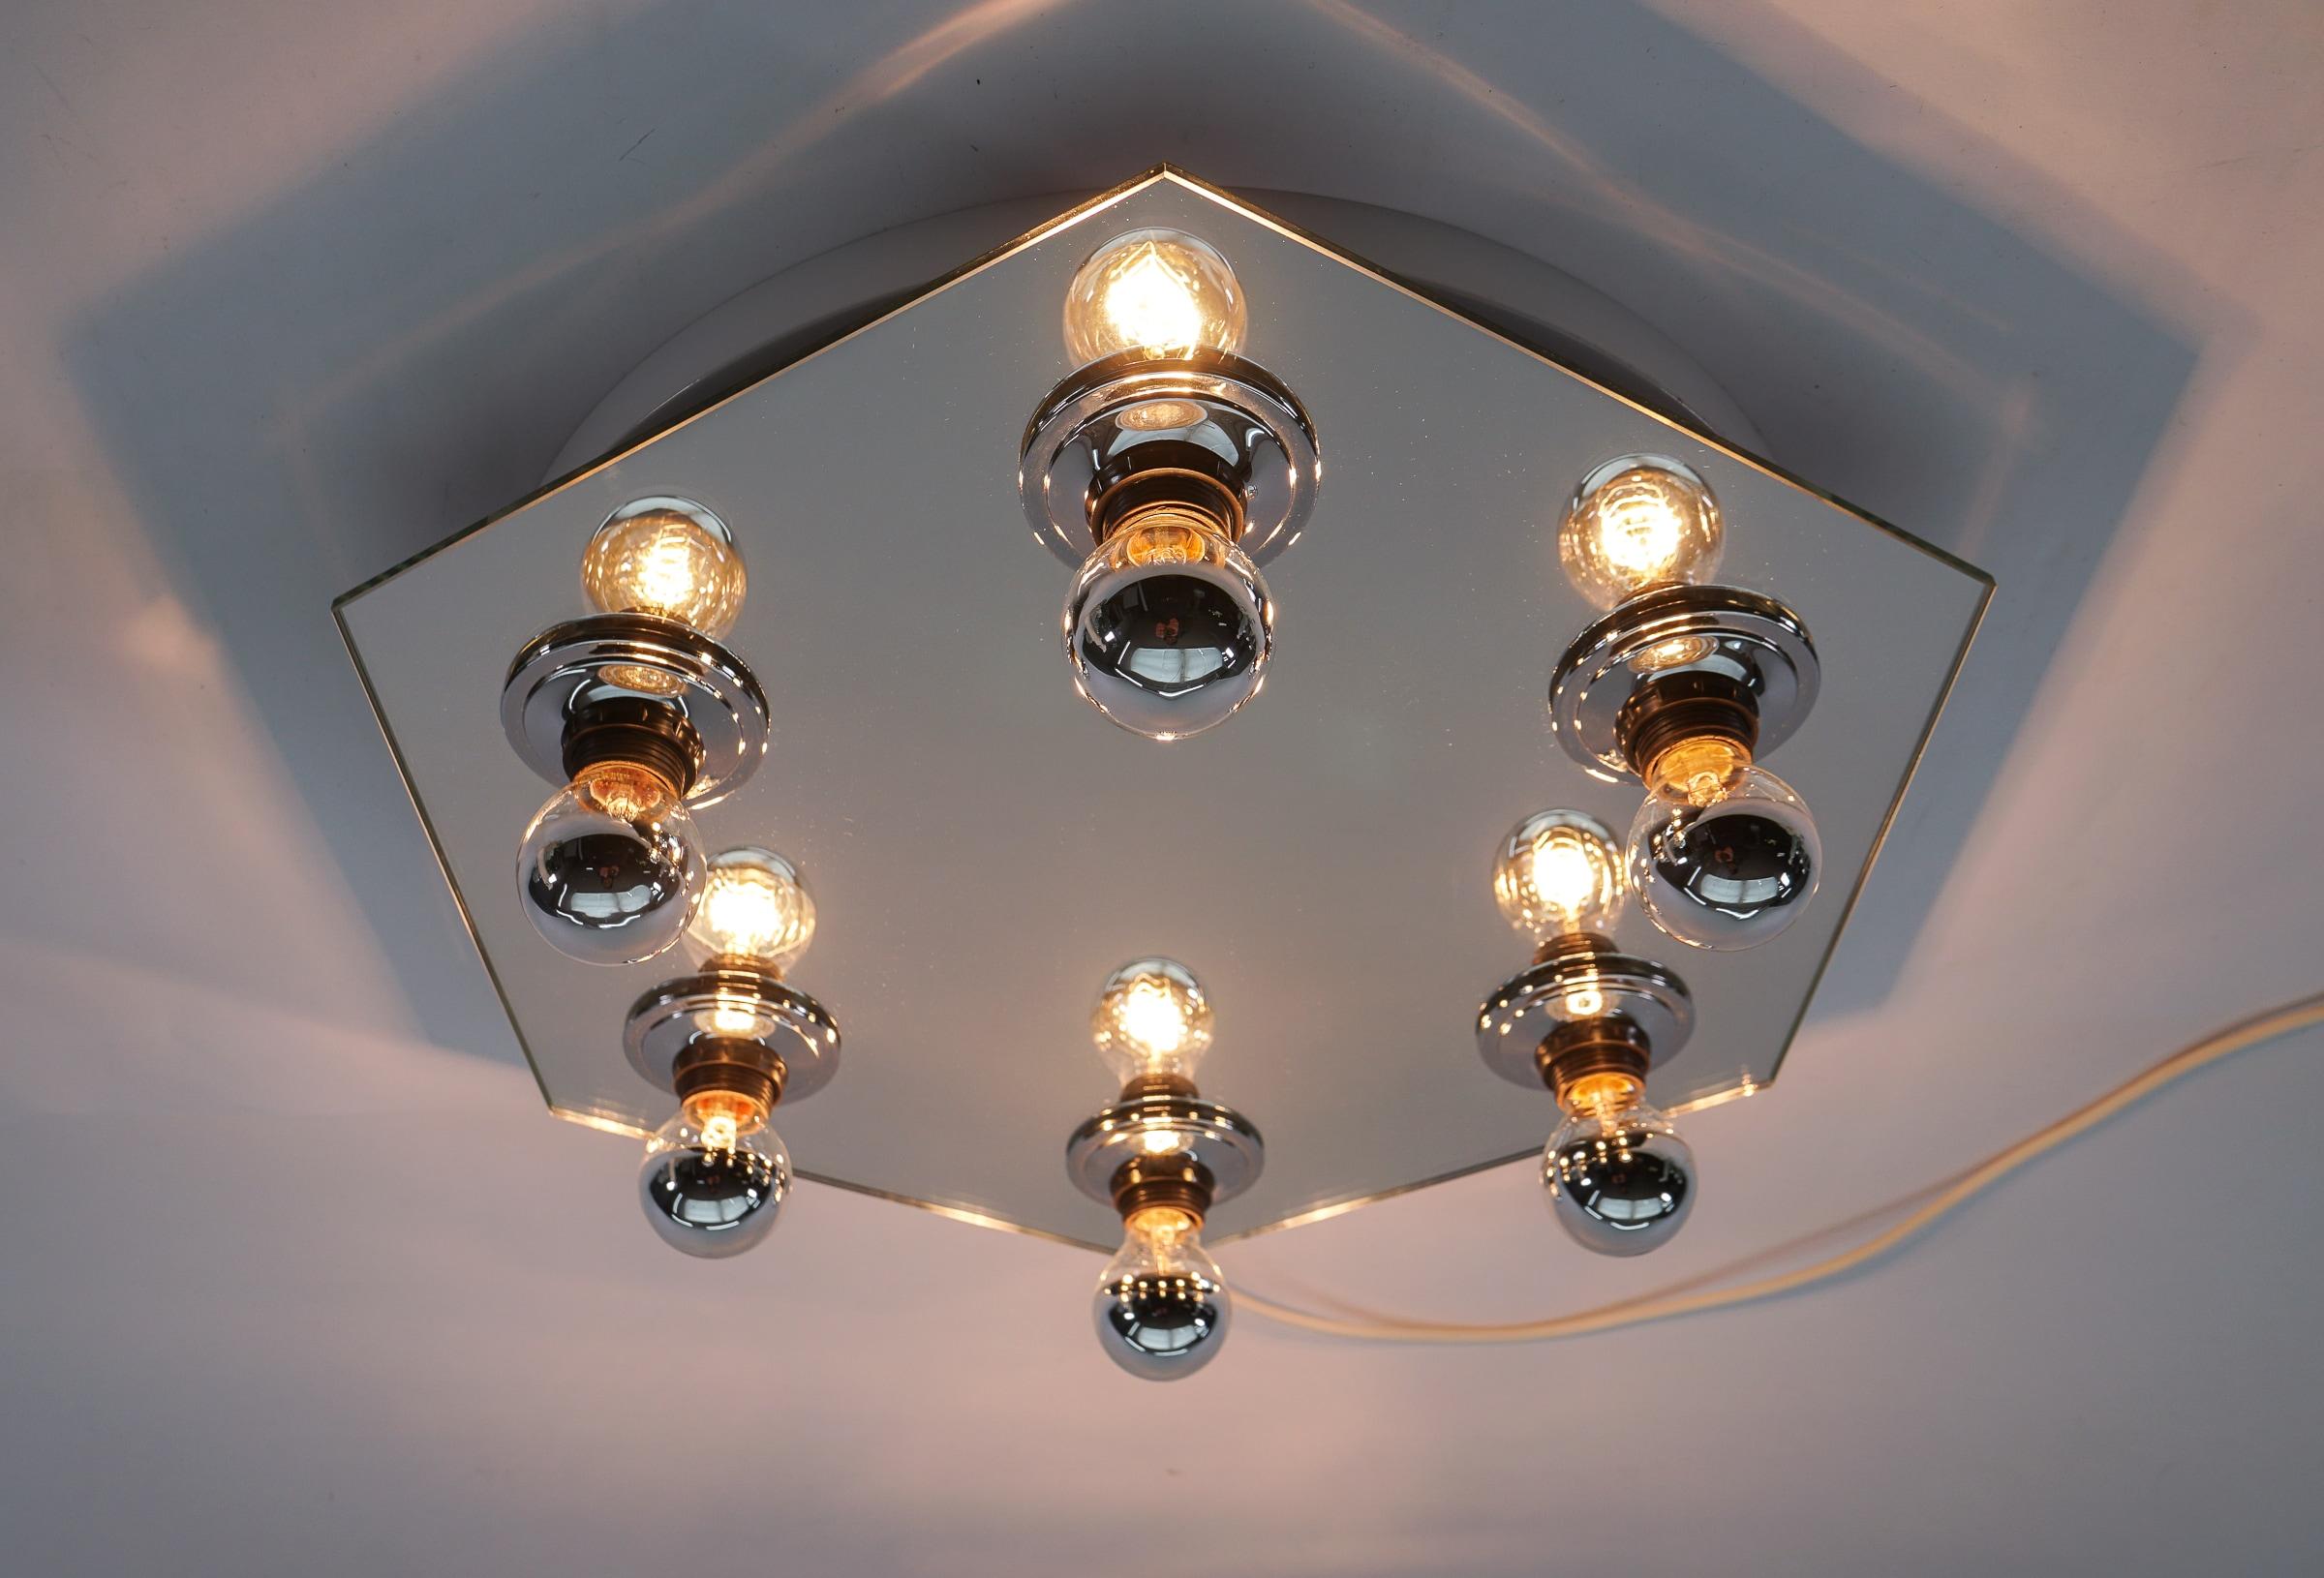 Late 20th Century Hexagonal Mirrored Ceiling Lamp With Six Light Bulbs, 1970s Italy For Sale